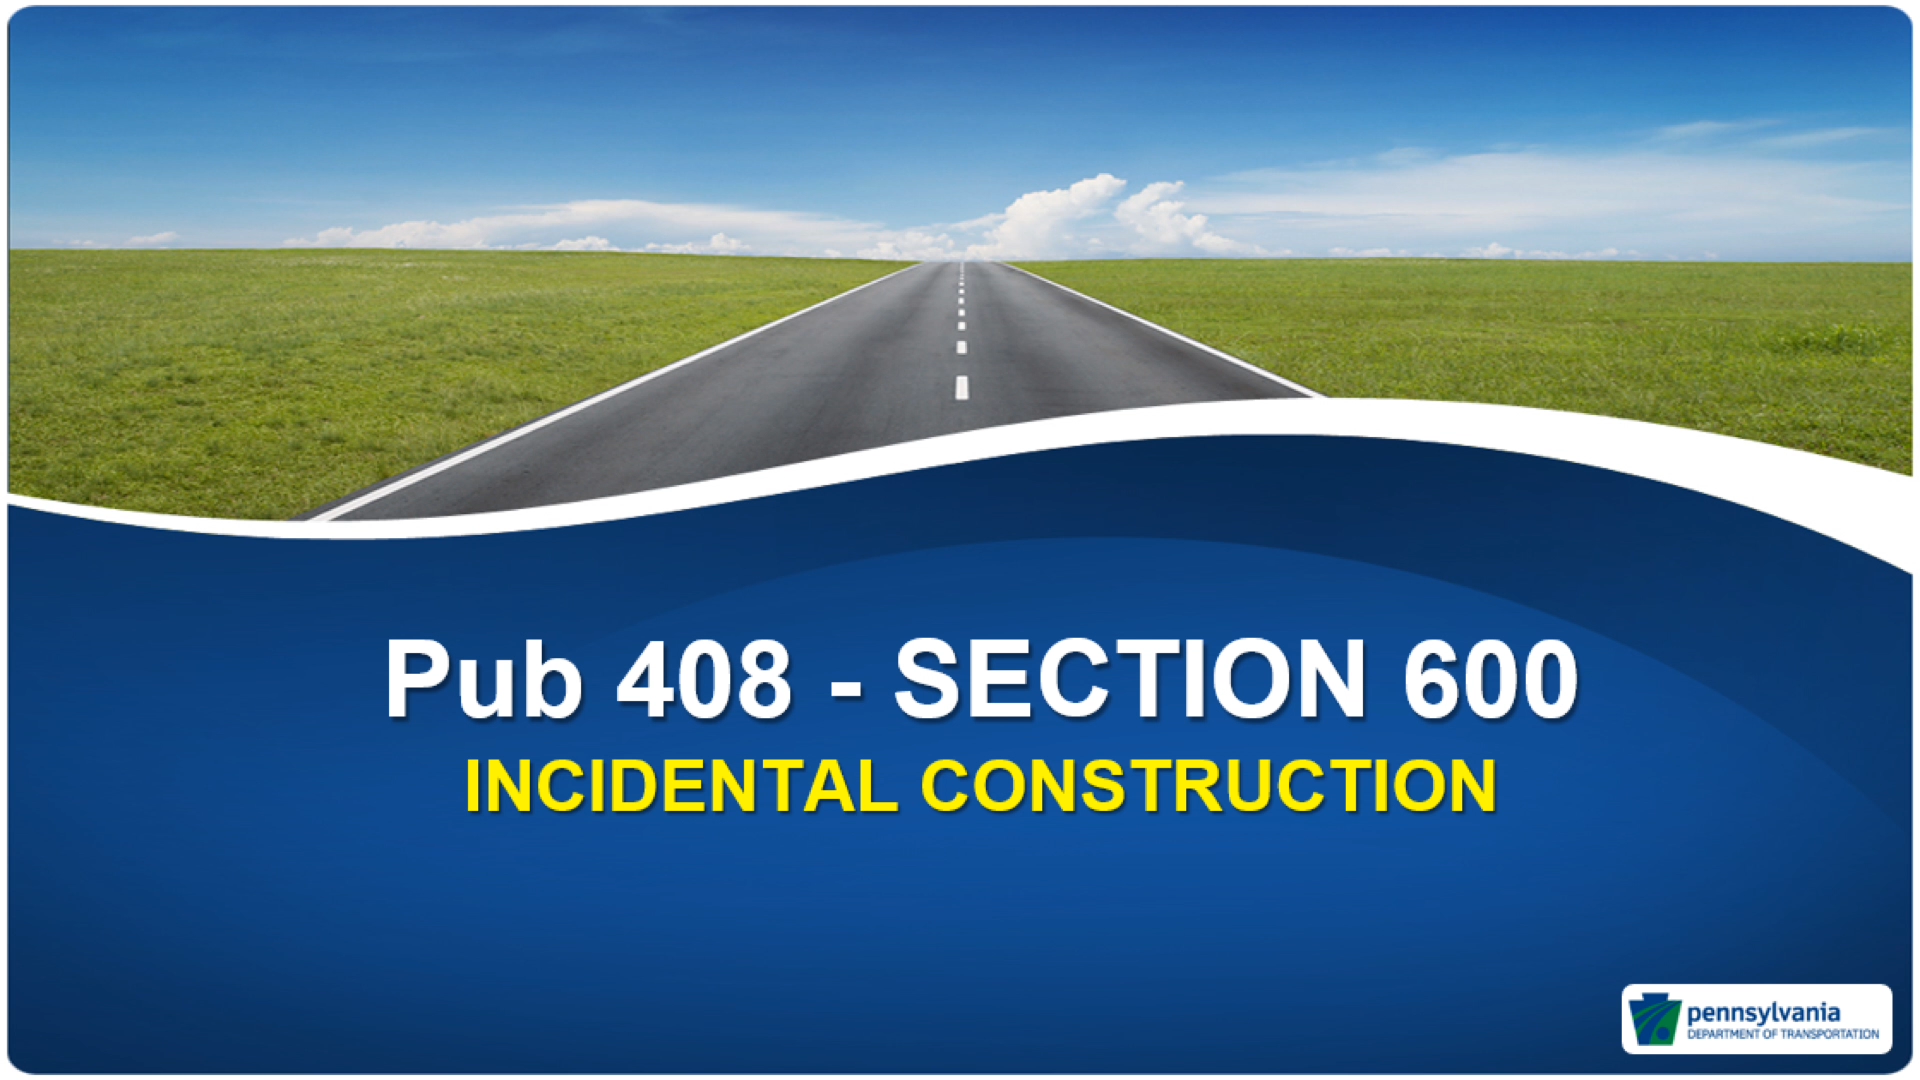 Section 600